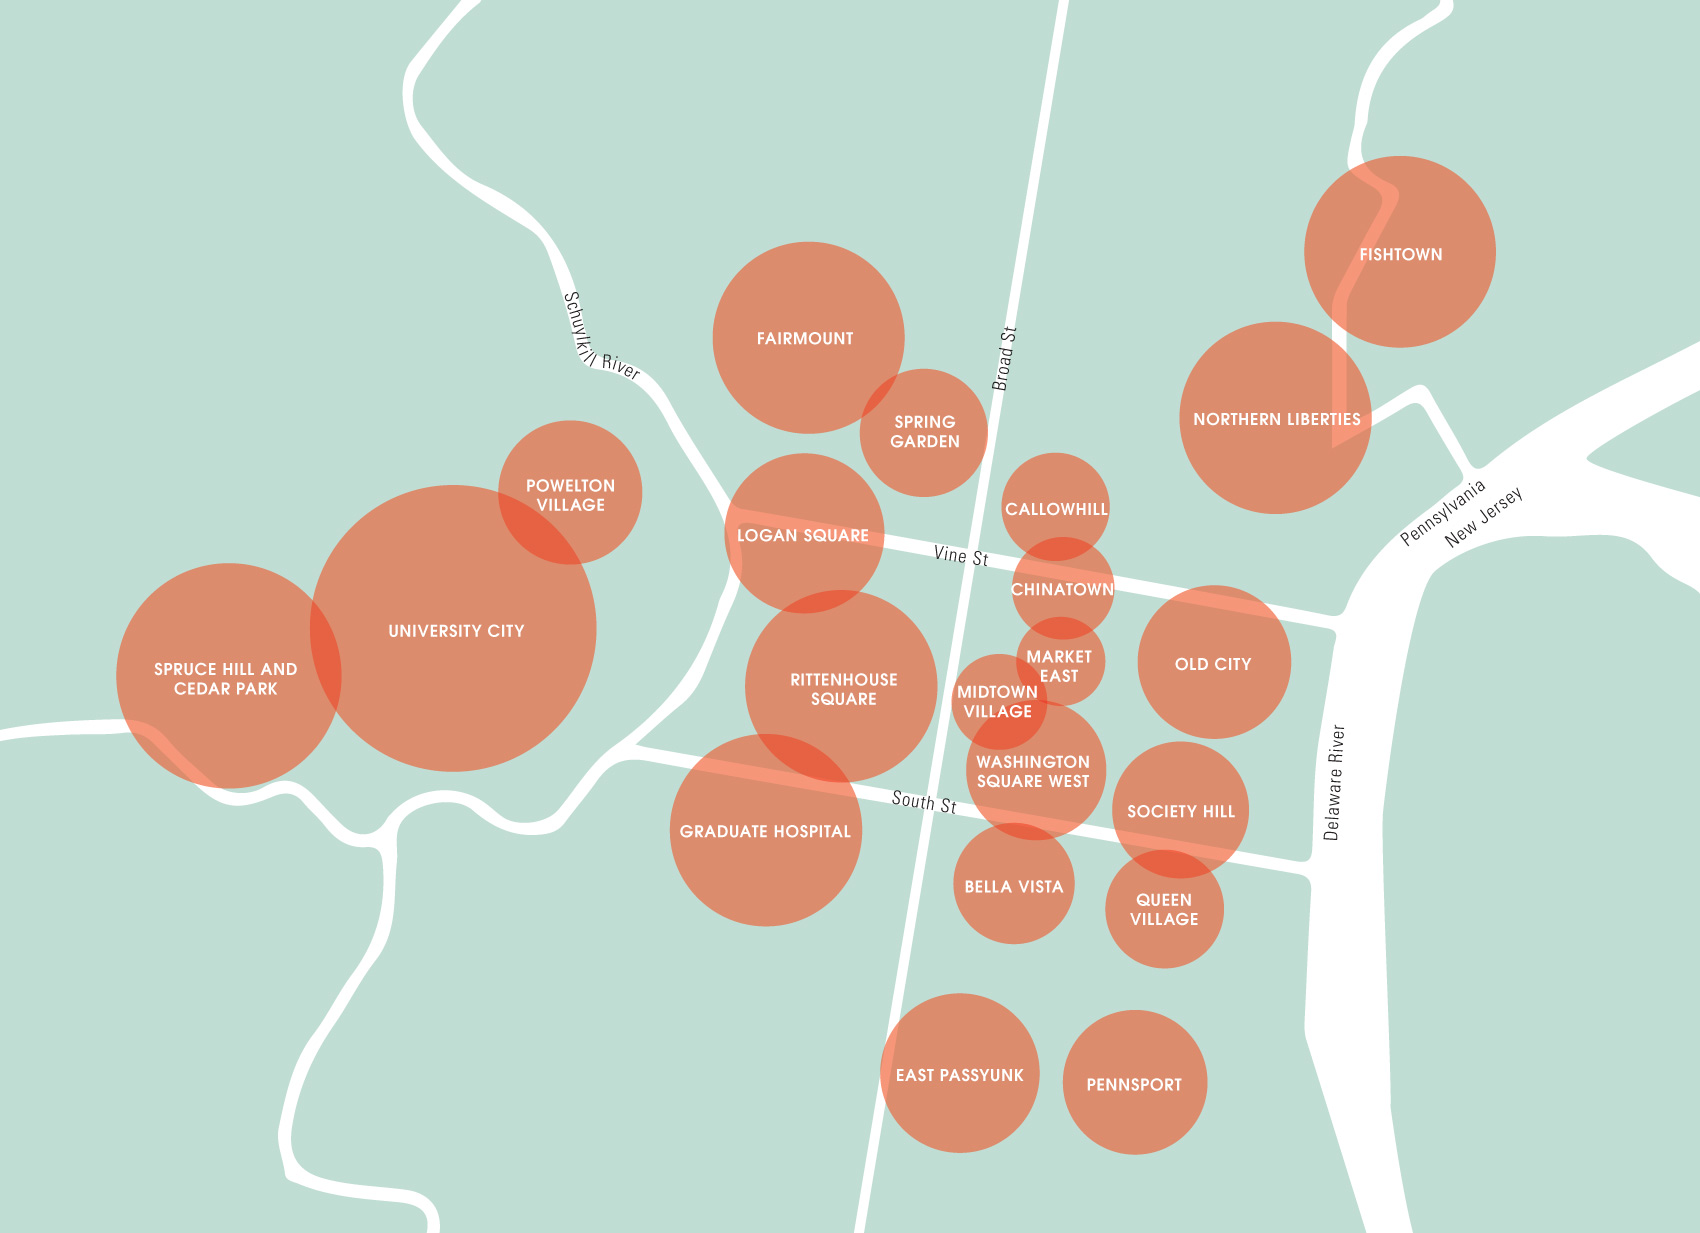 A map of Philadelphia's common places and attractions